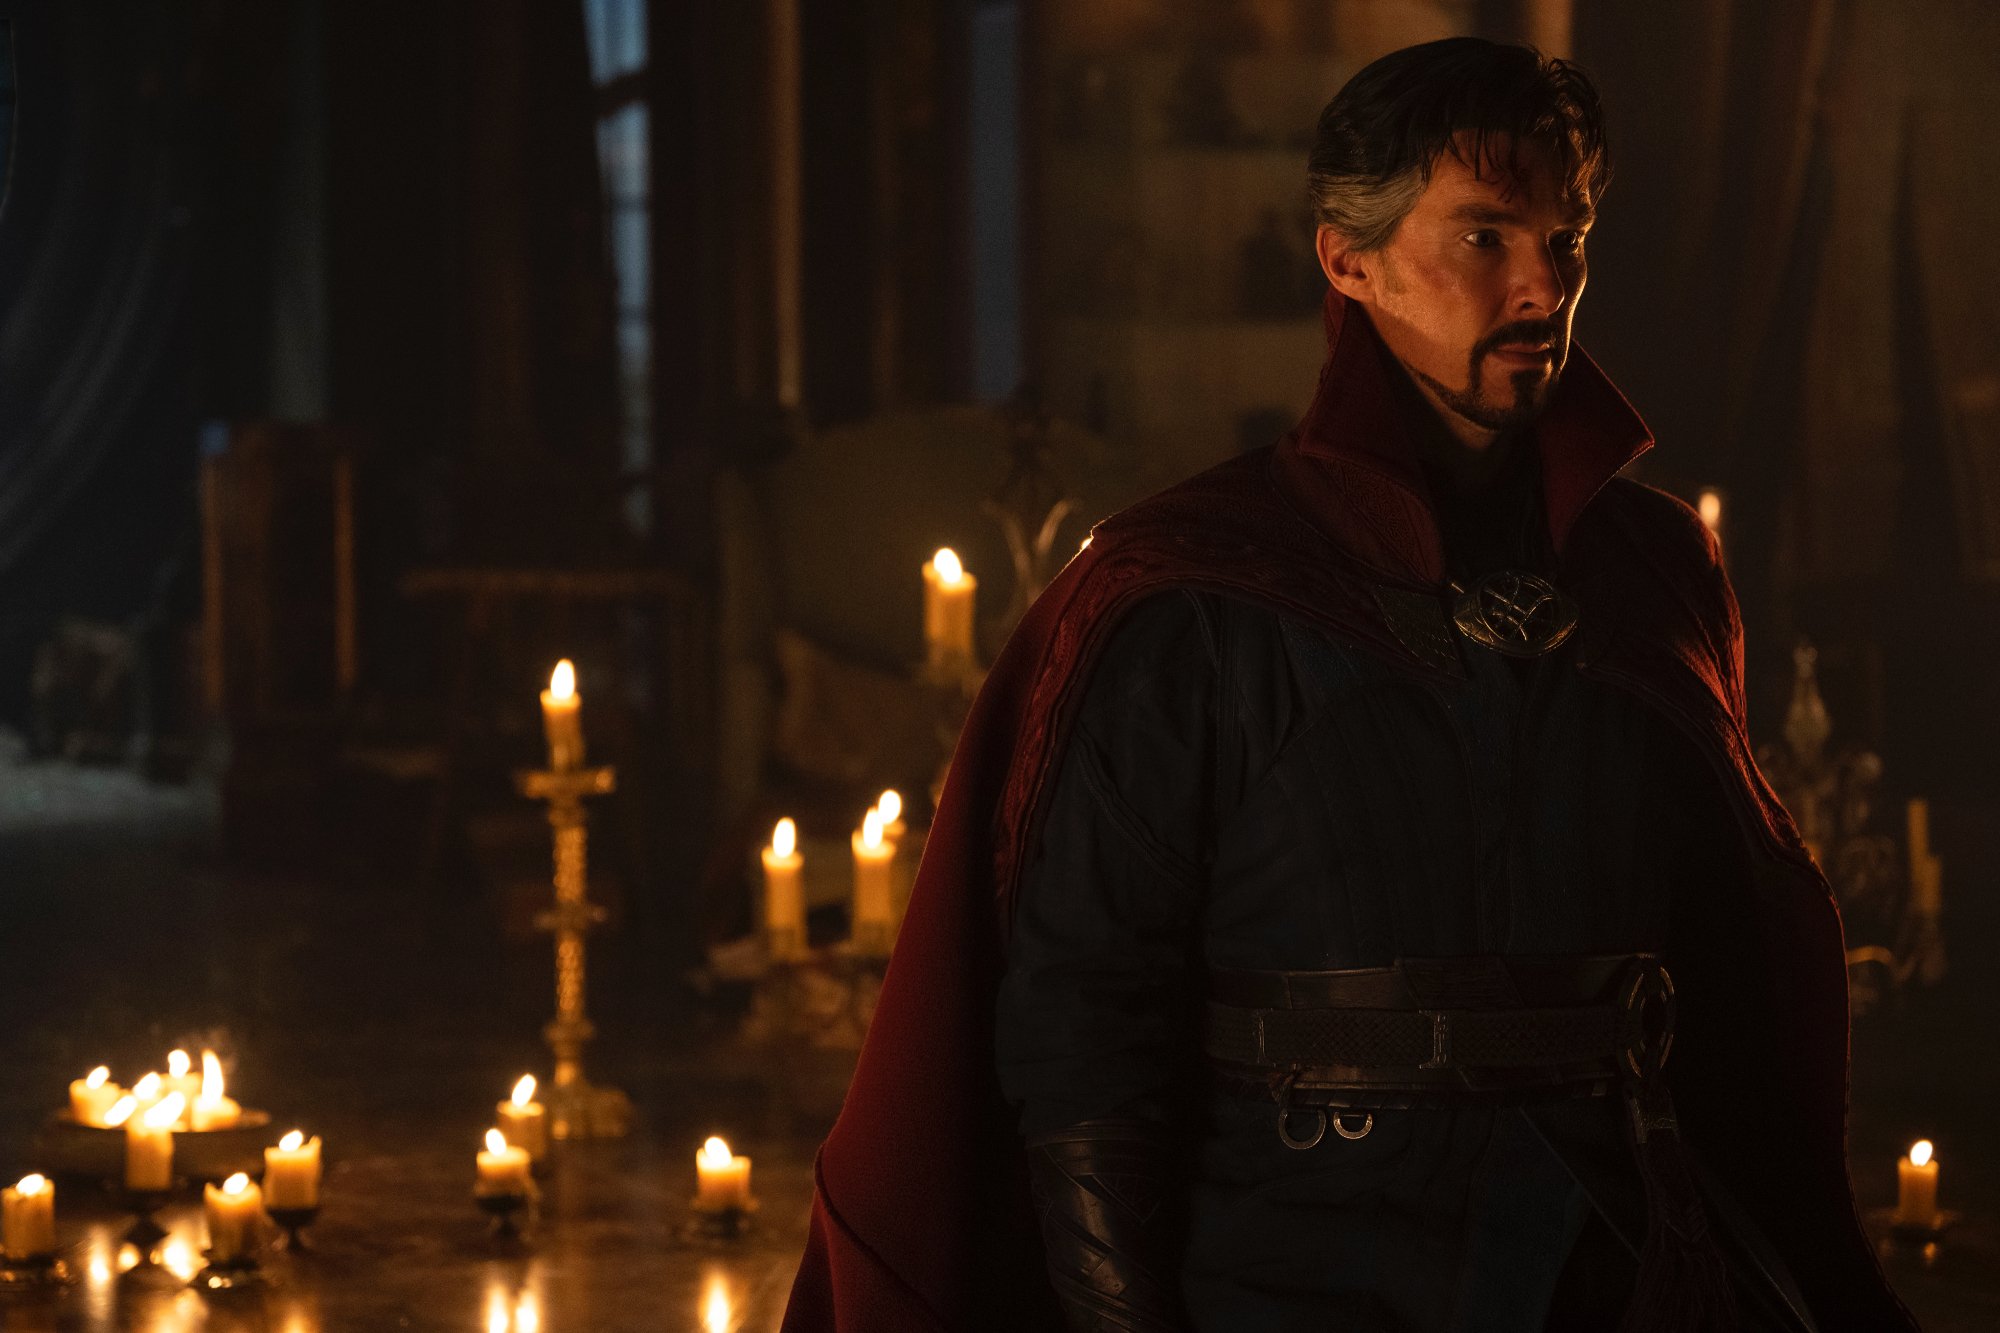 ‘Doctor Strange in the Multiverse of Madness’ Movie Review: Sam Raimi Melds Superhero and Campy Horror